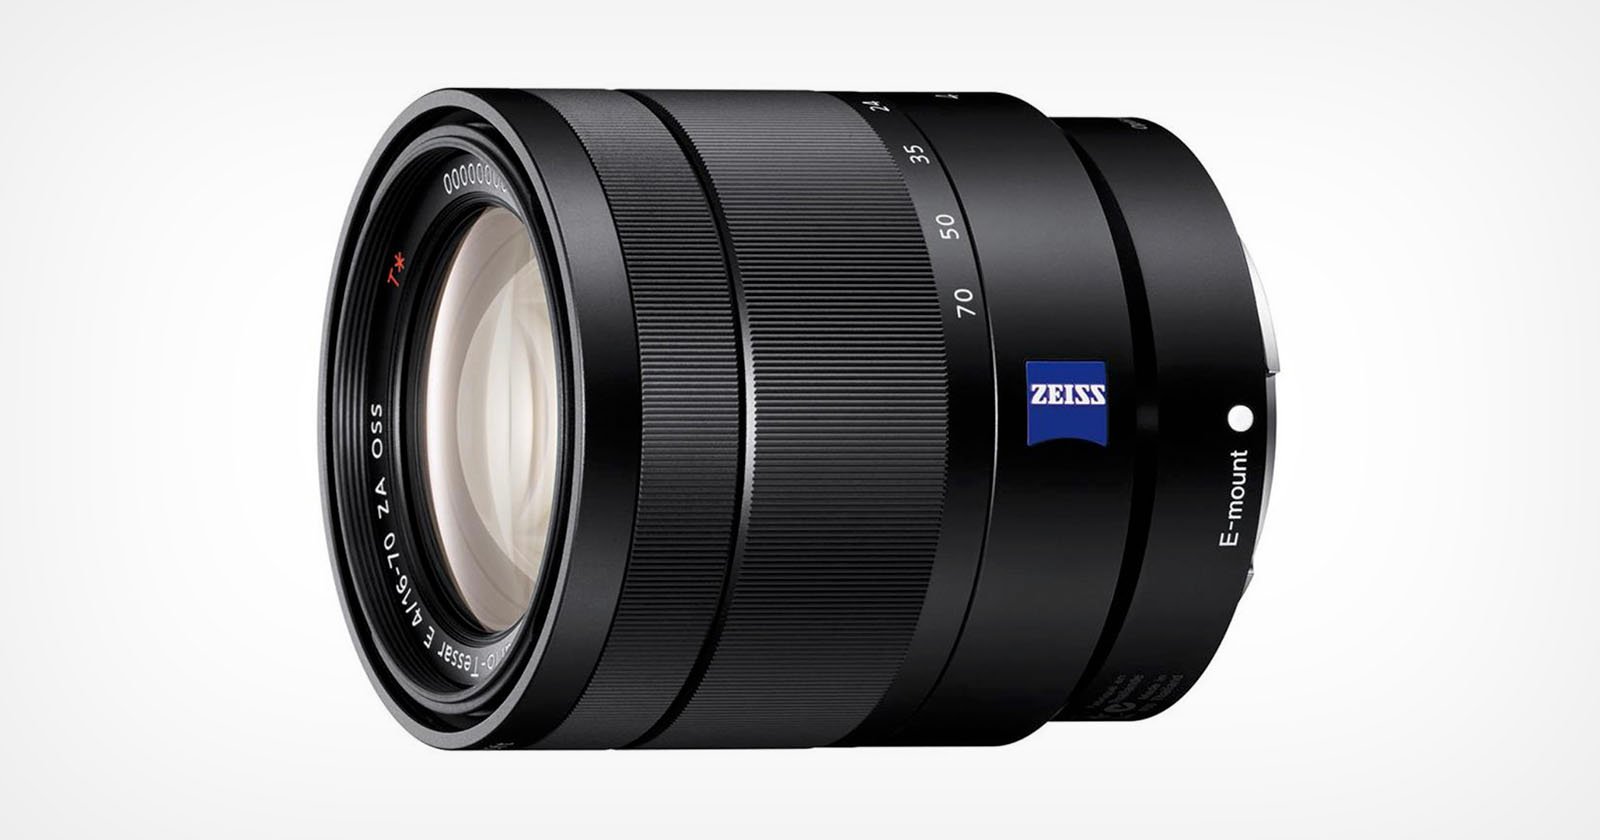  sony discontinues zeiss 16-70mm aps-c lens japan 